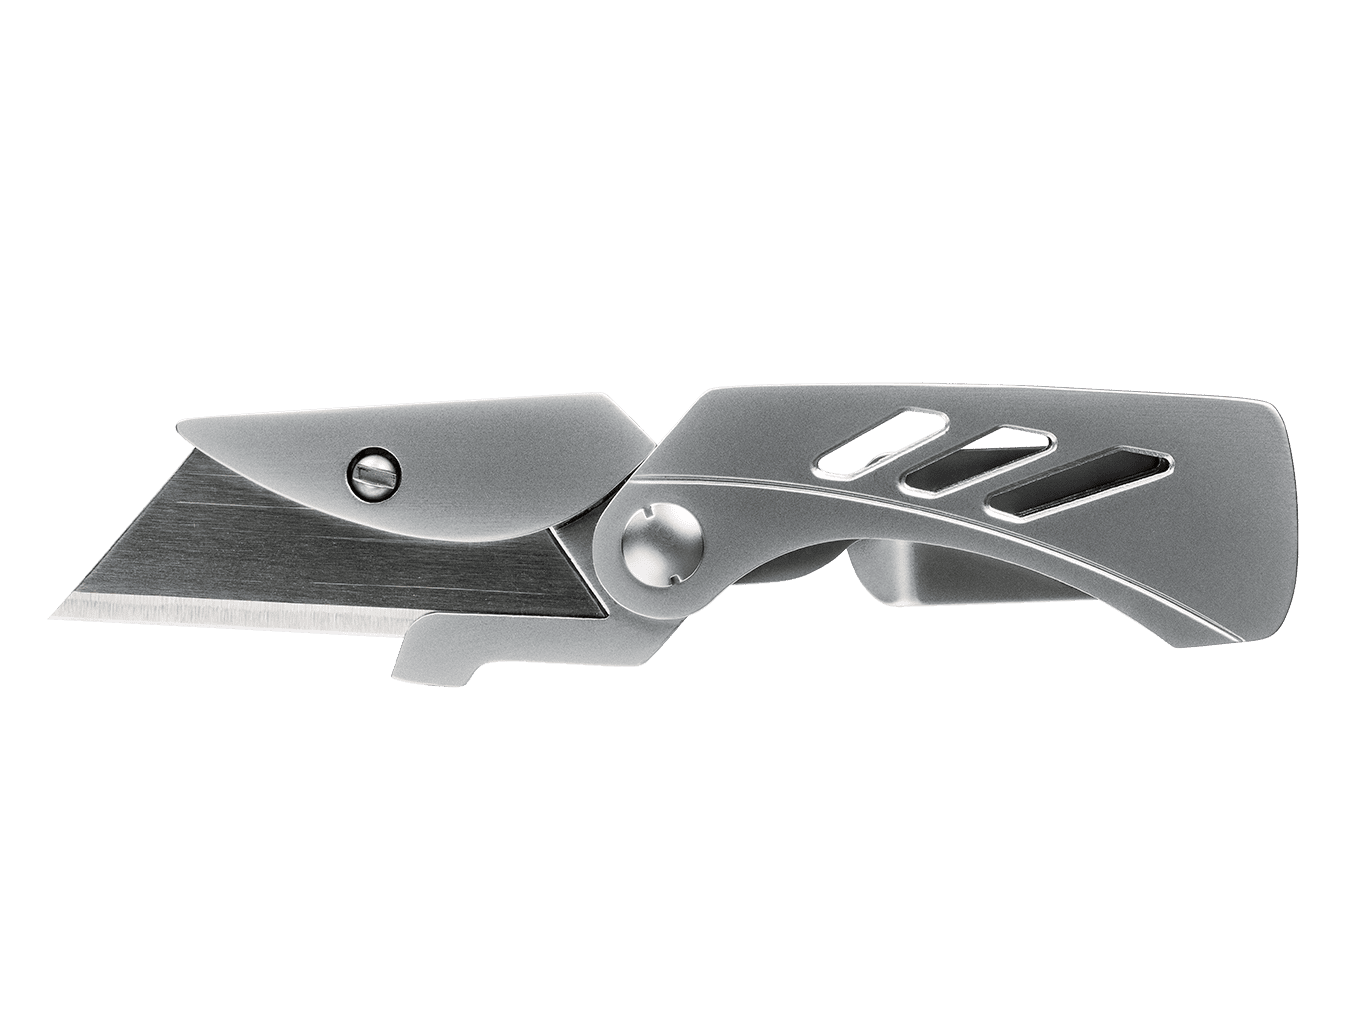 Gerber EAB Lite Stainless Steel Exchange-A-Blade Utility Razor Pocket Knife with Clip